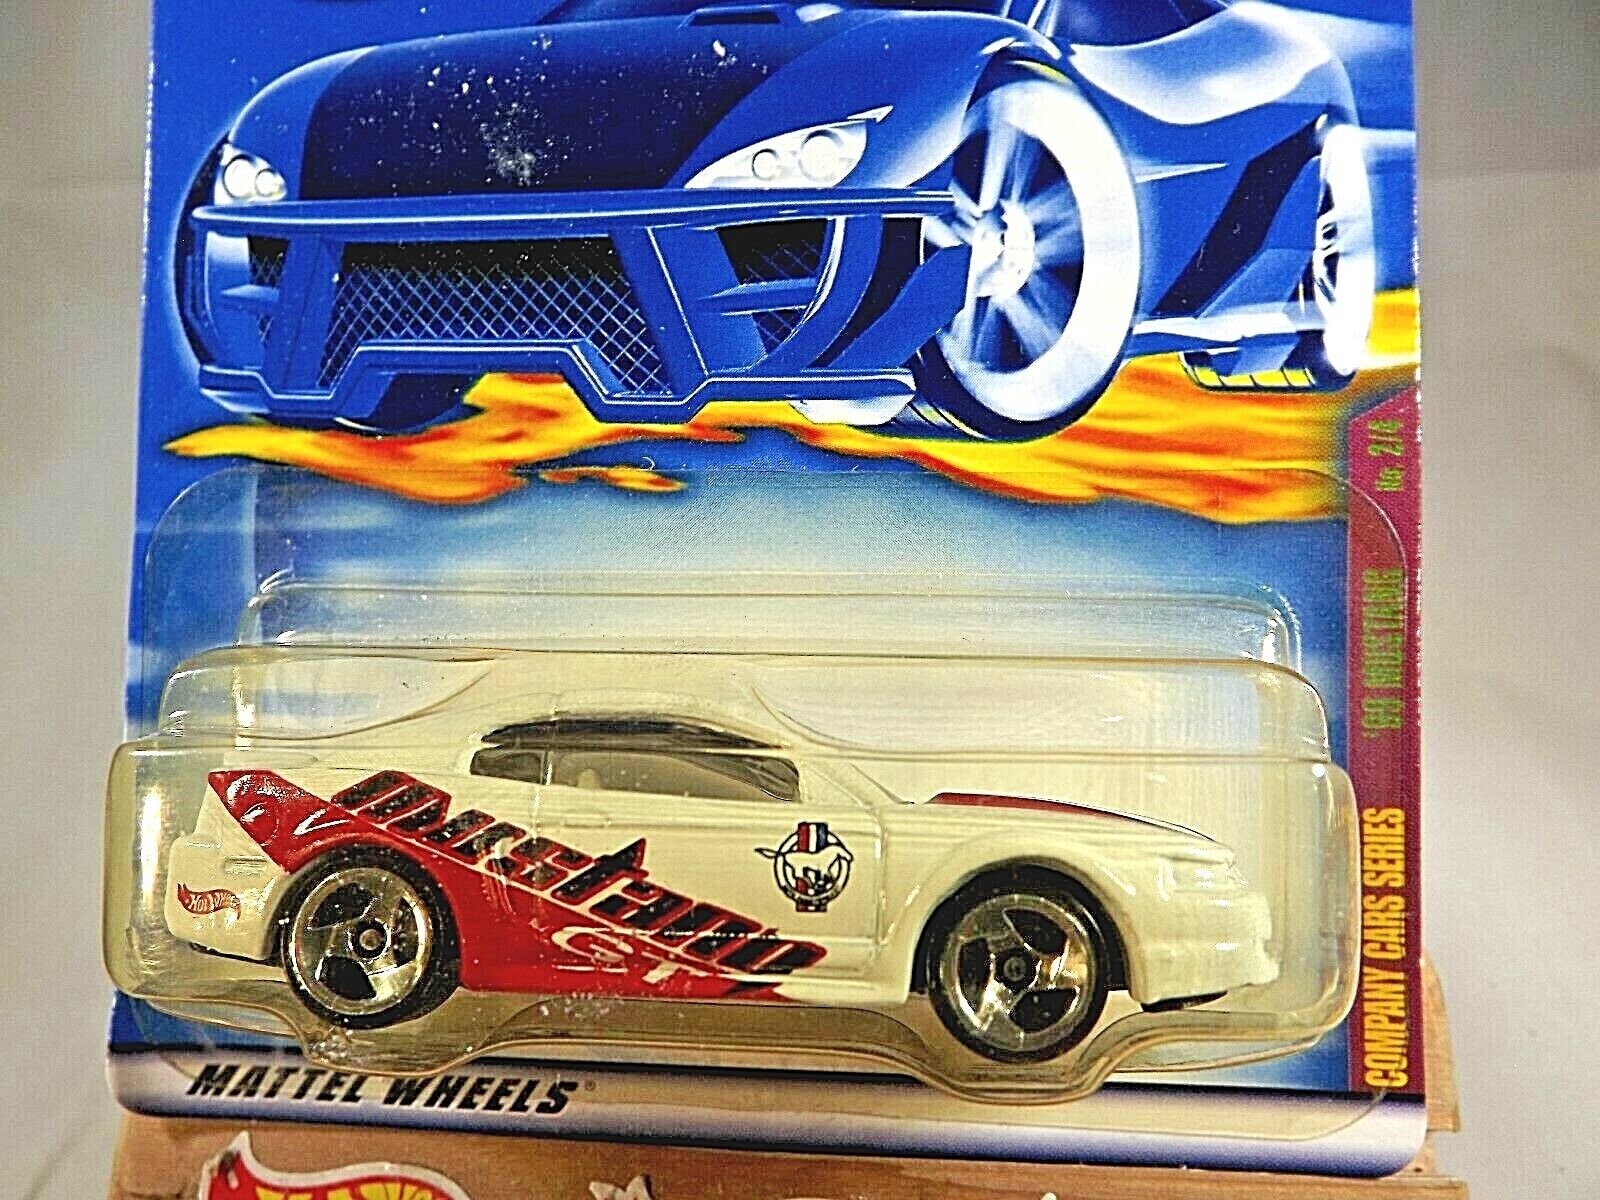 2001 Hot Wheels COMPANY CARS SERIES Complete Set of 4 #85,86,87,88   See Details Hot Wheels 50123-0910 - фотография #5